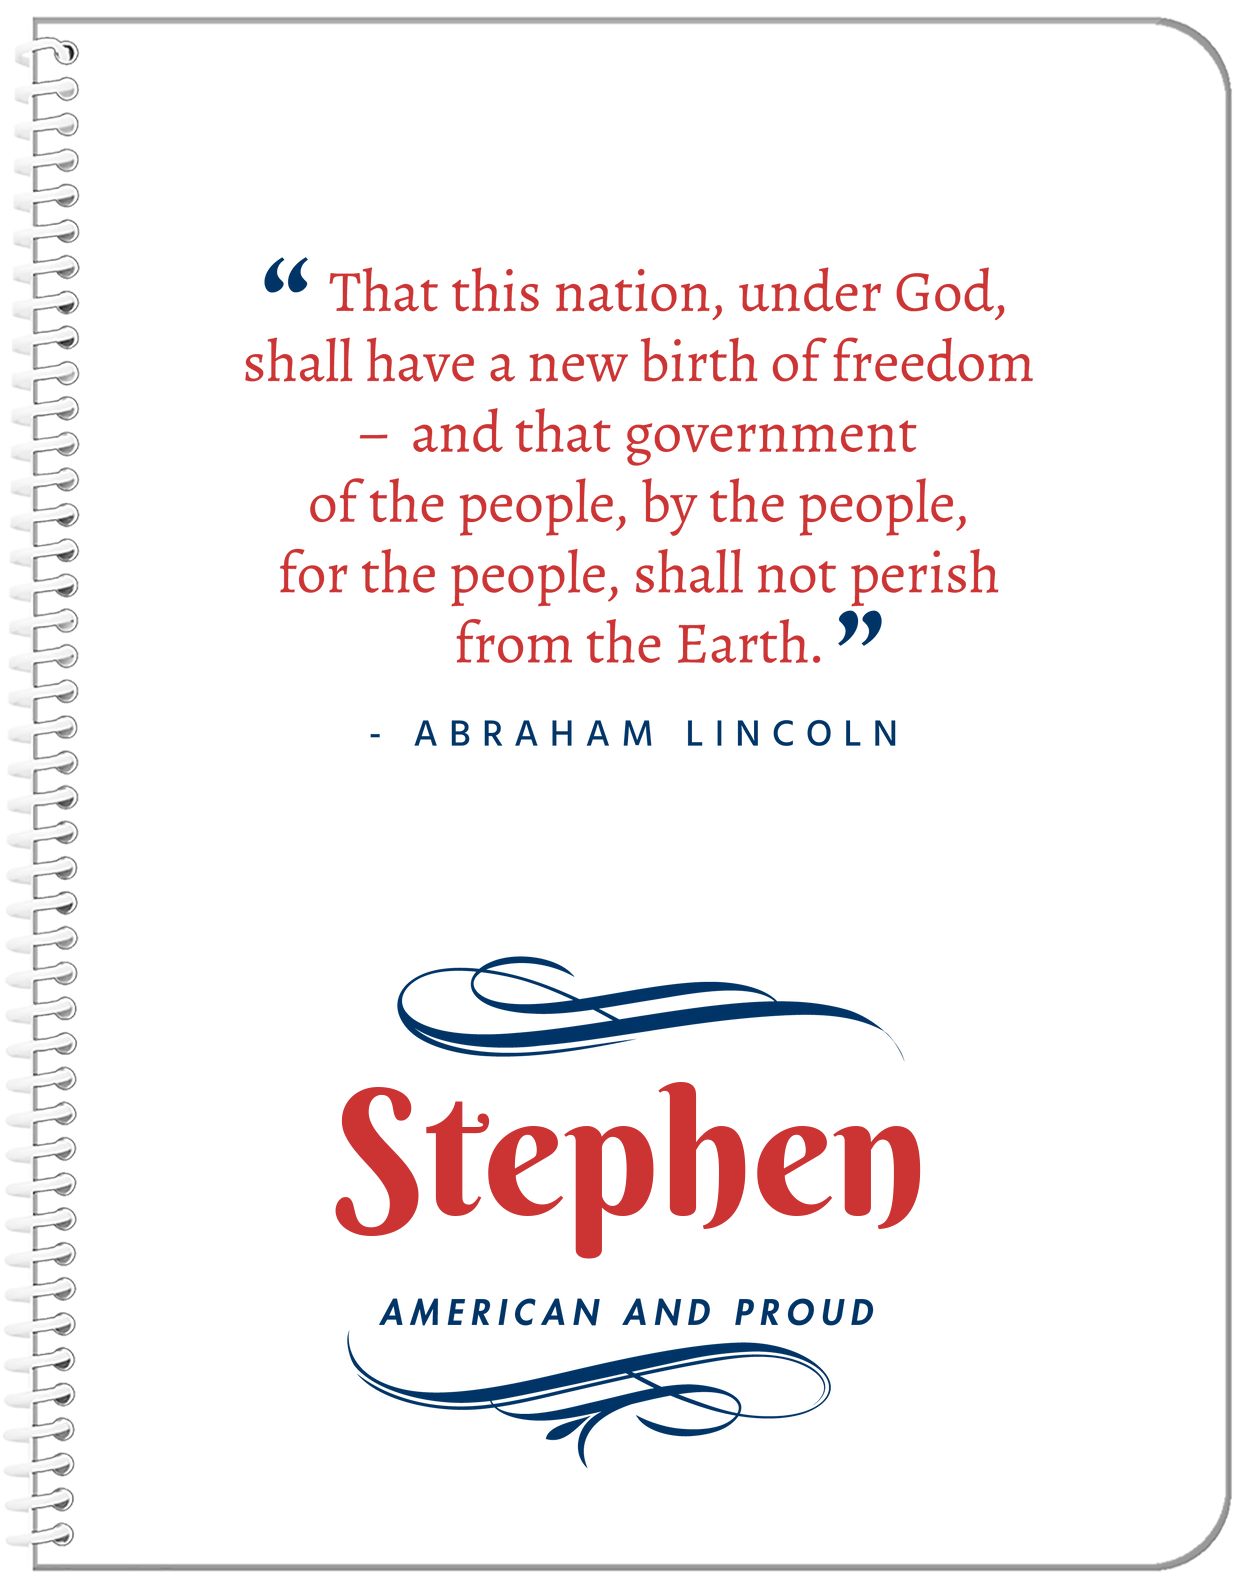 Personalized Famous Quotes Notebook - Abraham Lincoln - Front View